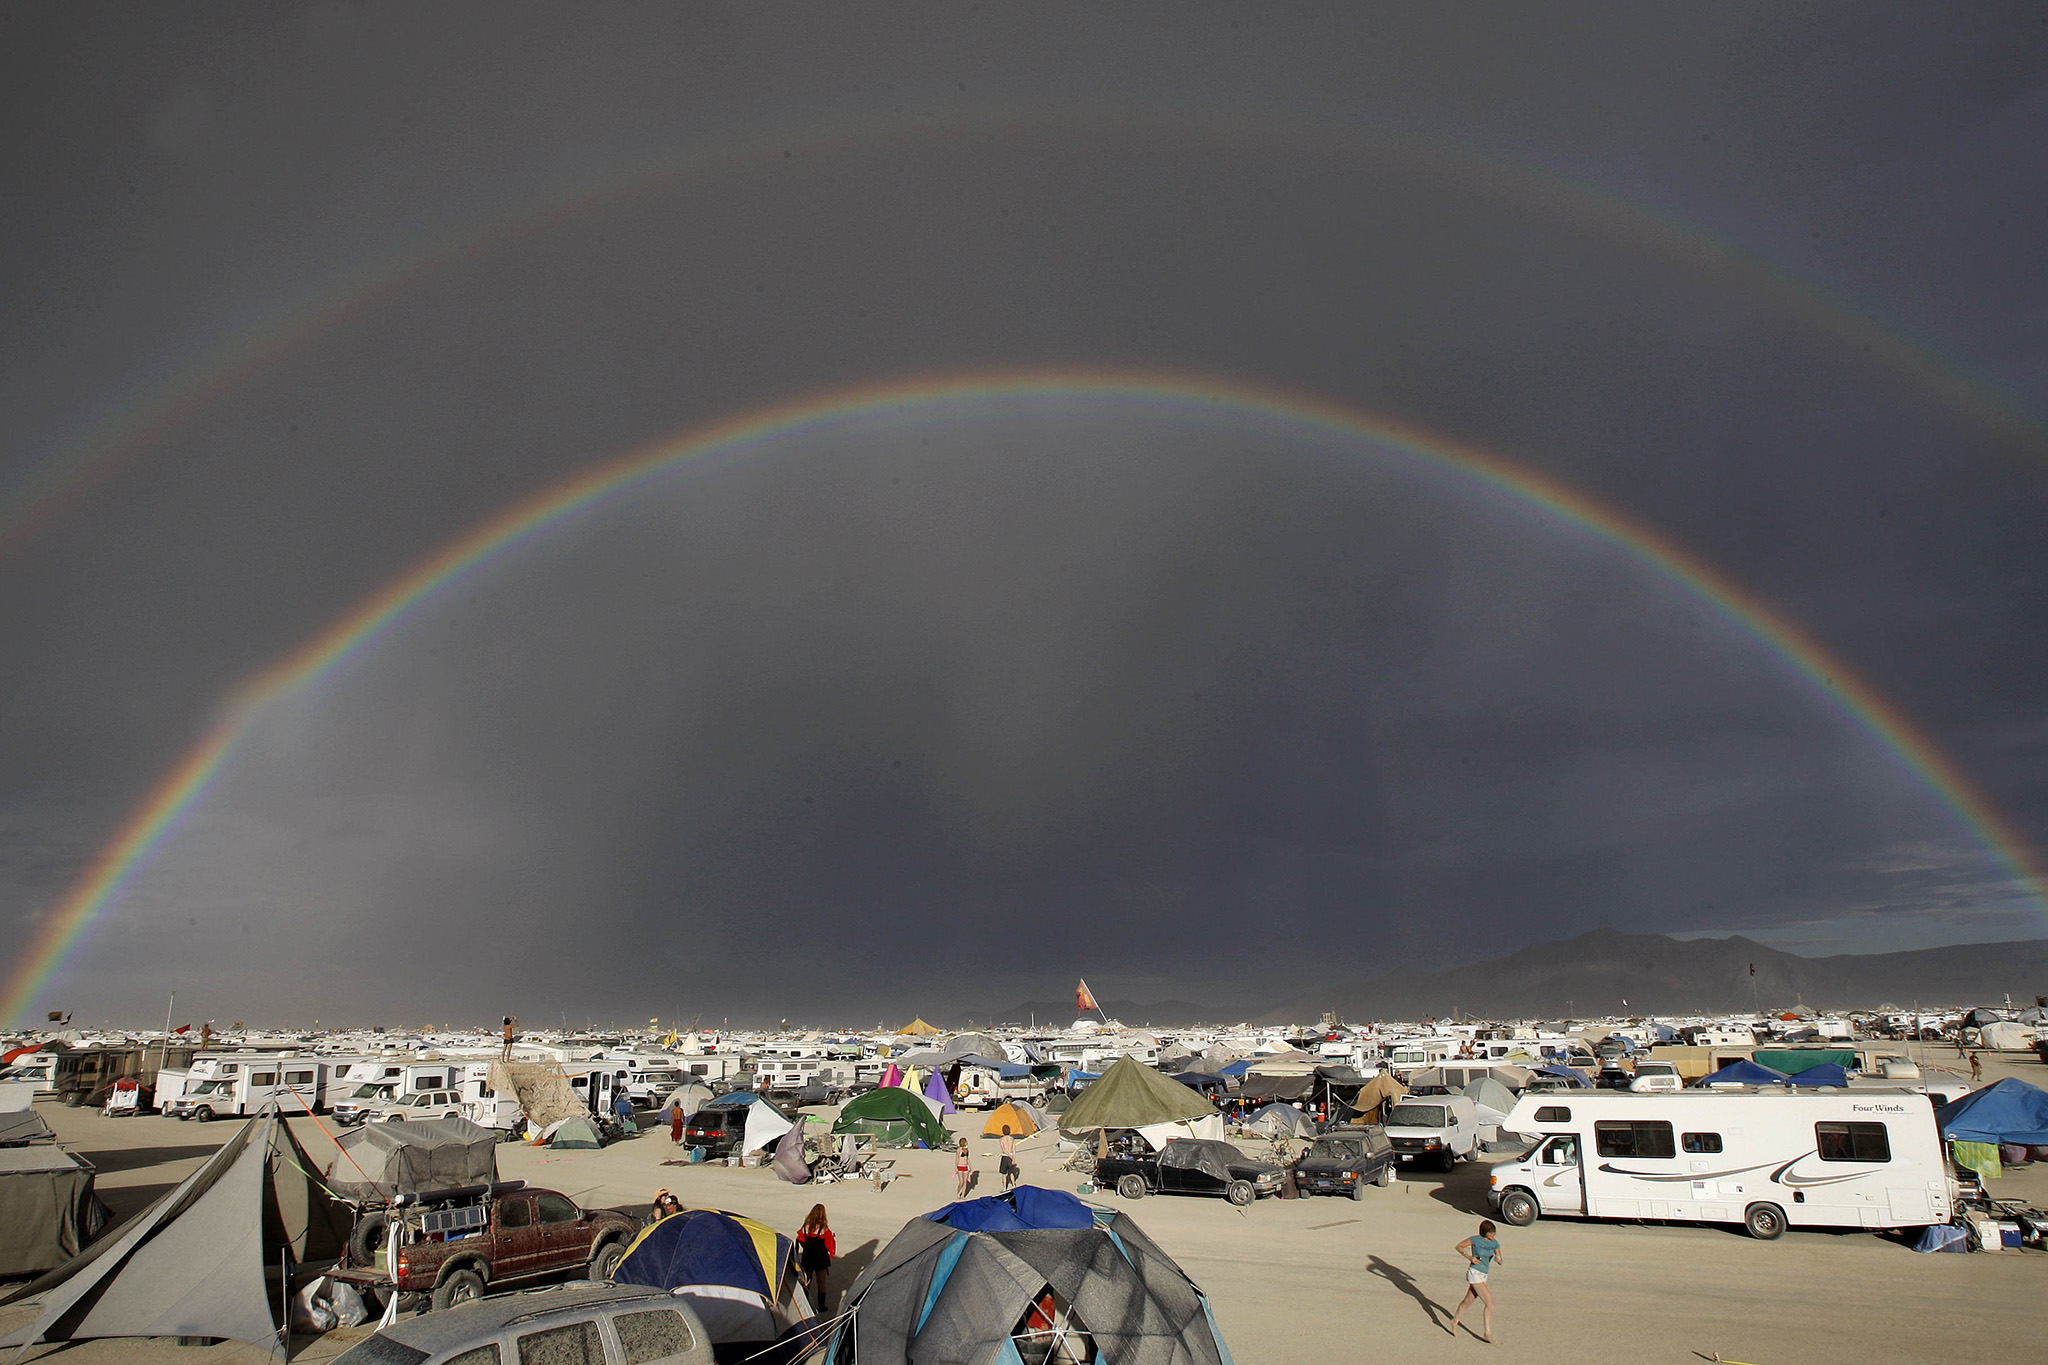 Wind, rain and chilly temps enter Burning Man weather forecast